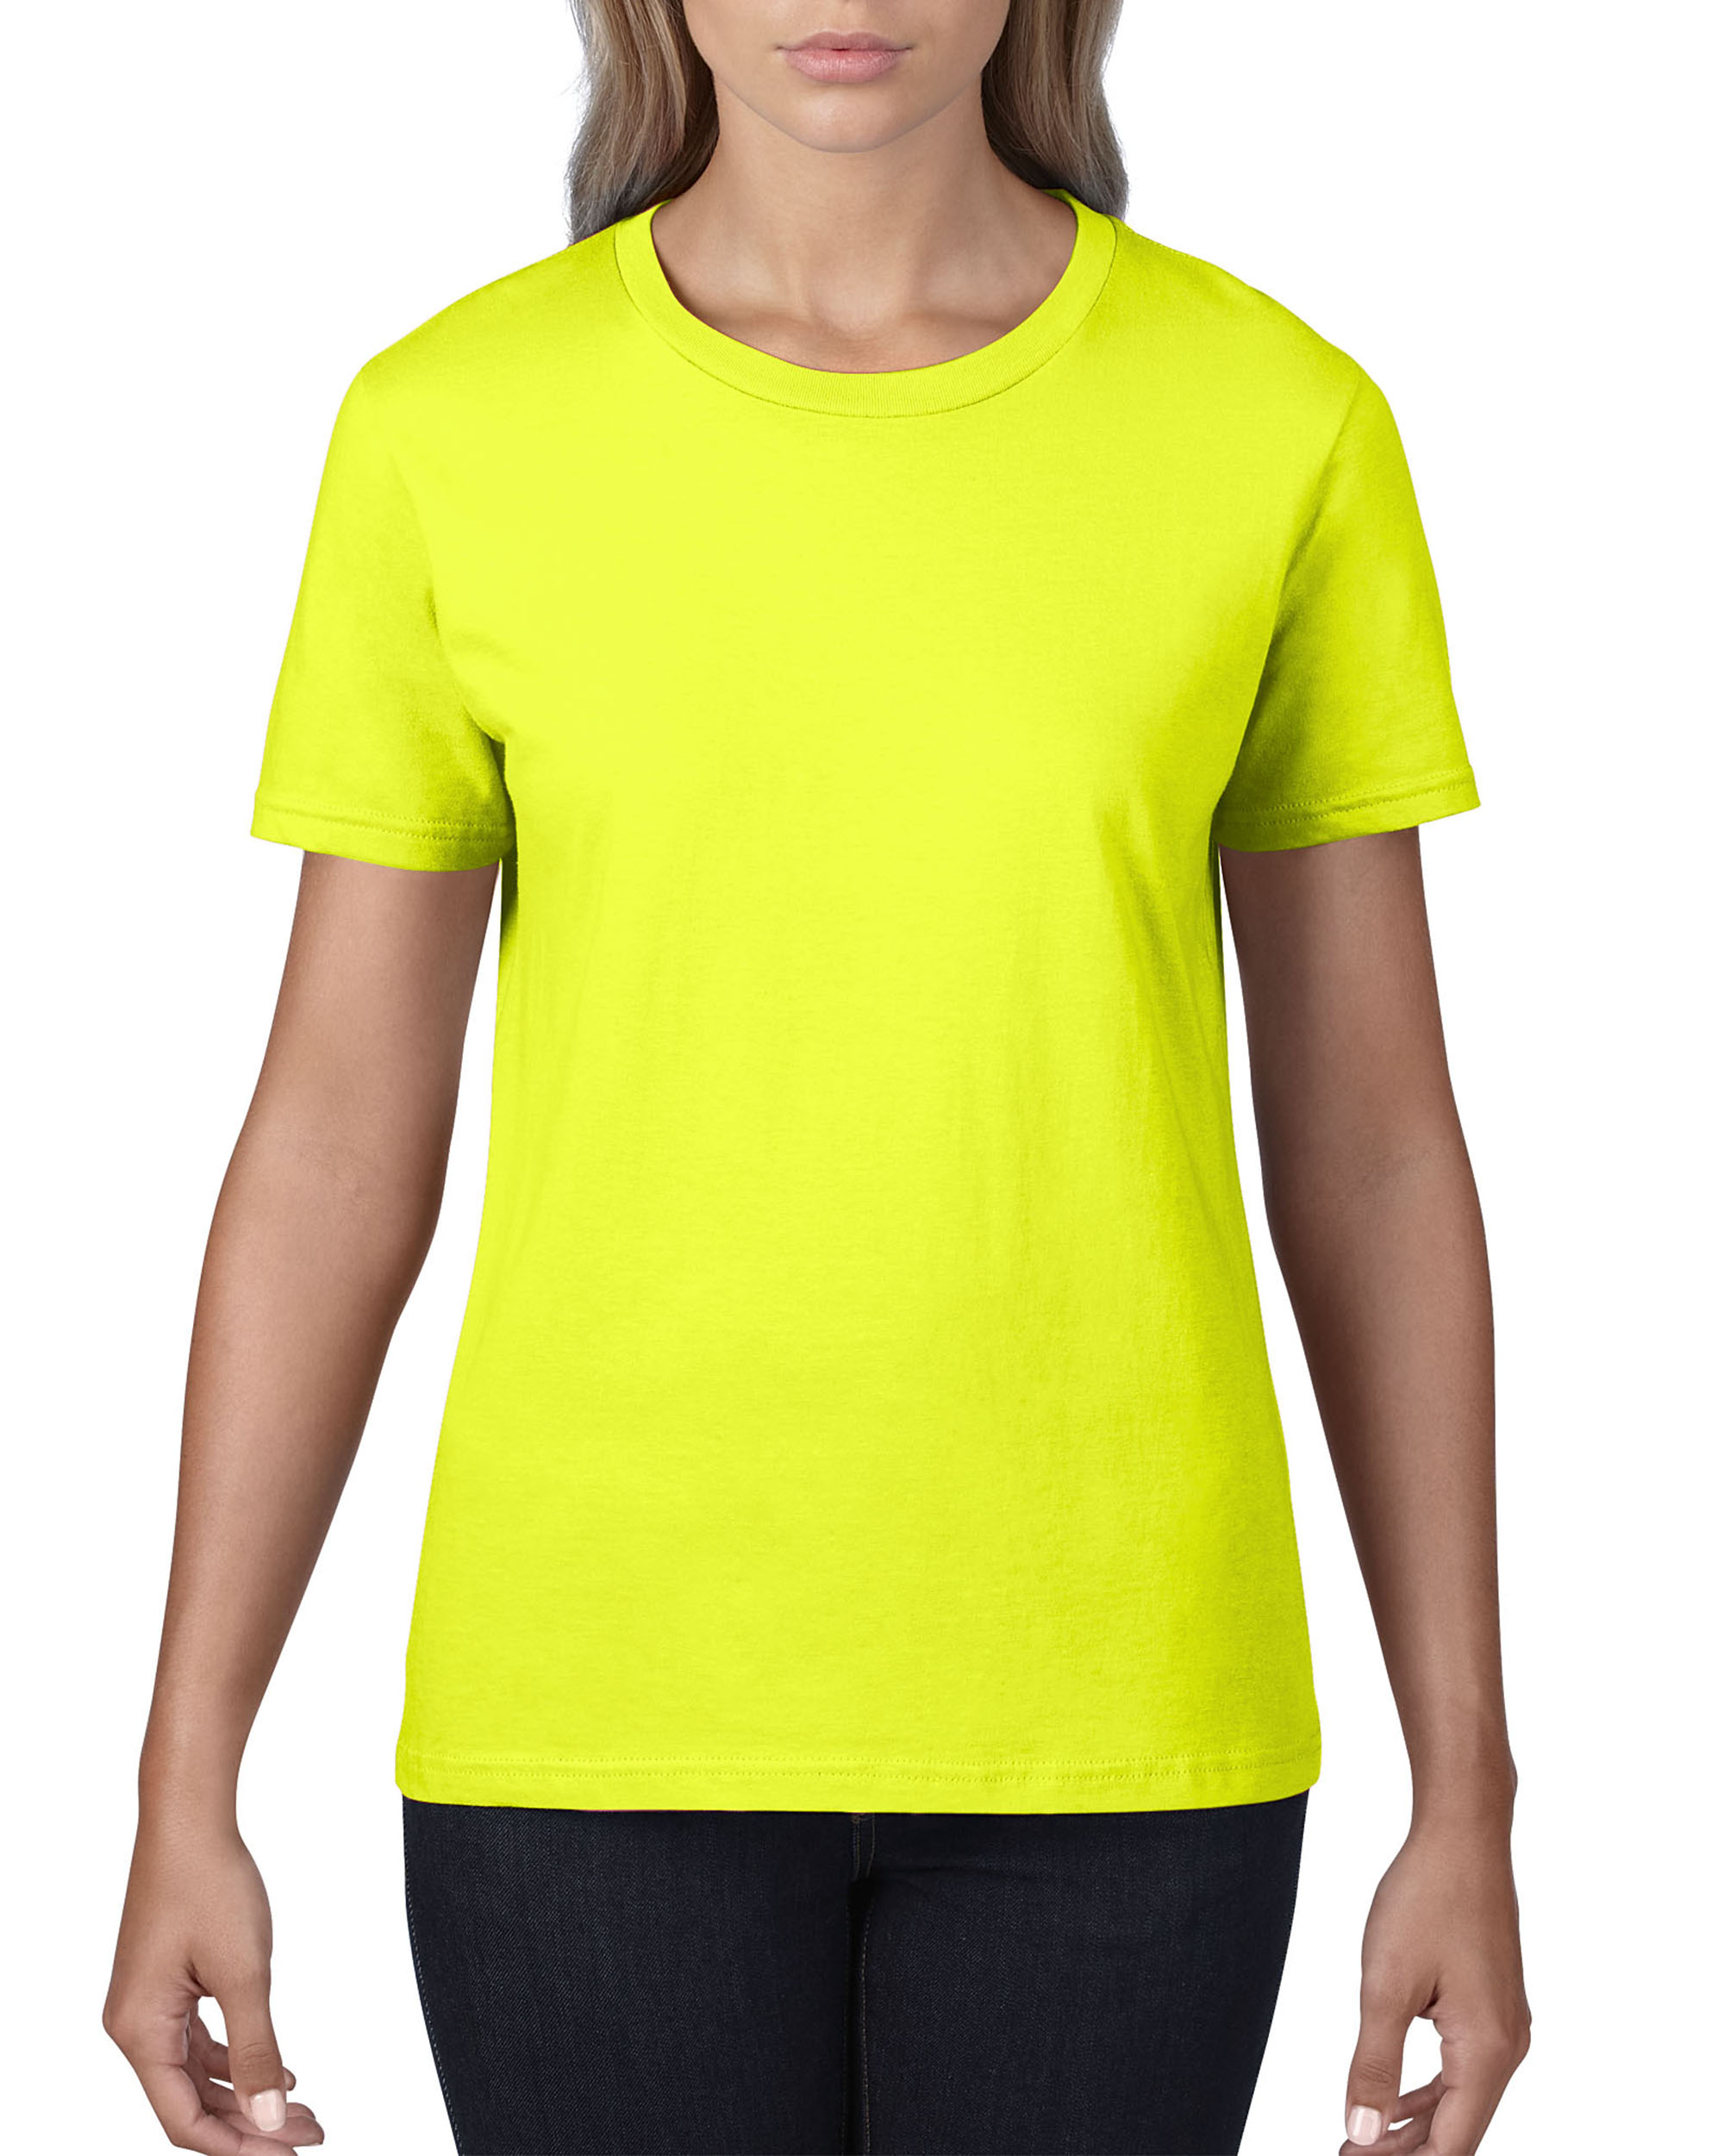 T-shirt Women’s Fashion Basic Tee ANVIL (OUTLET)